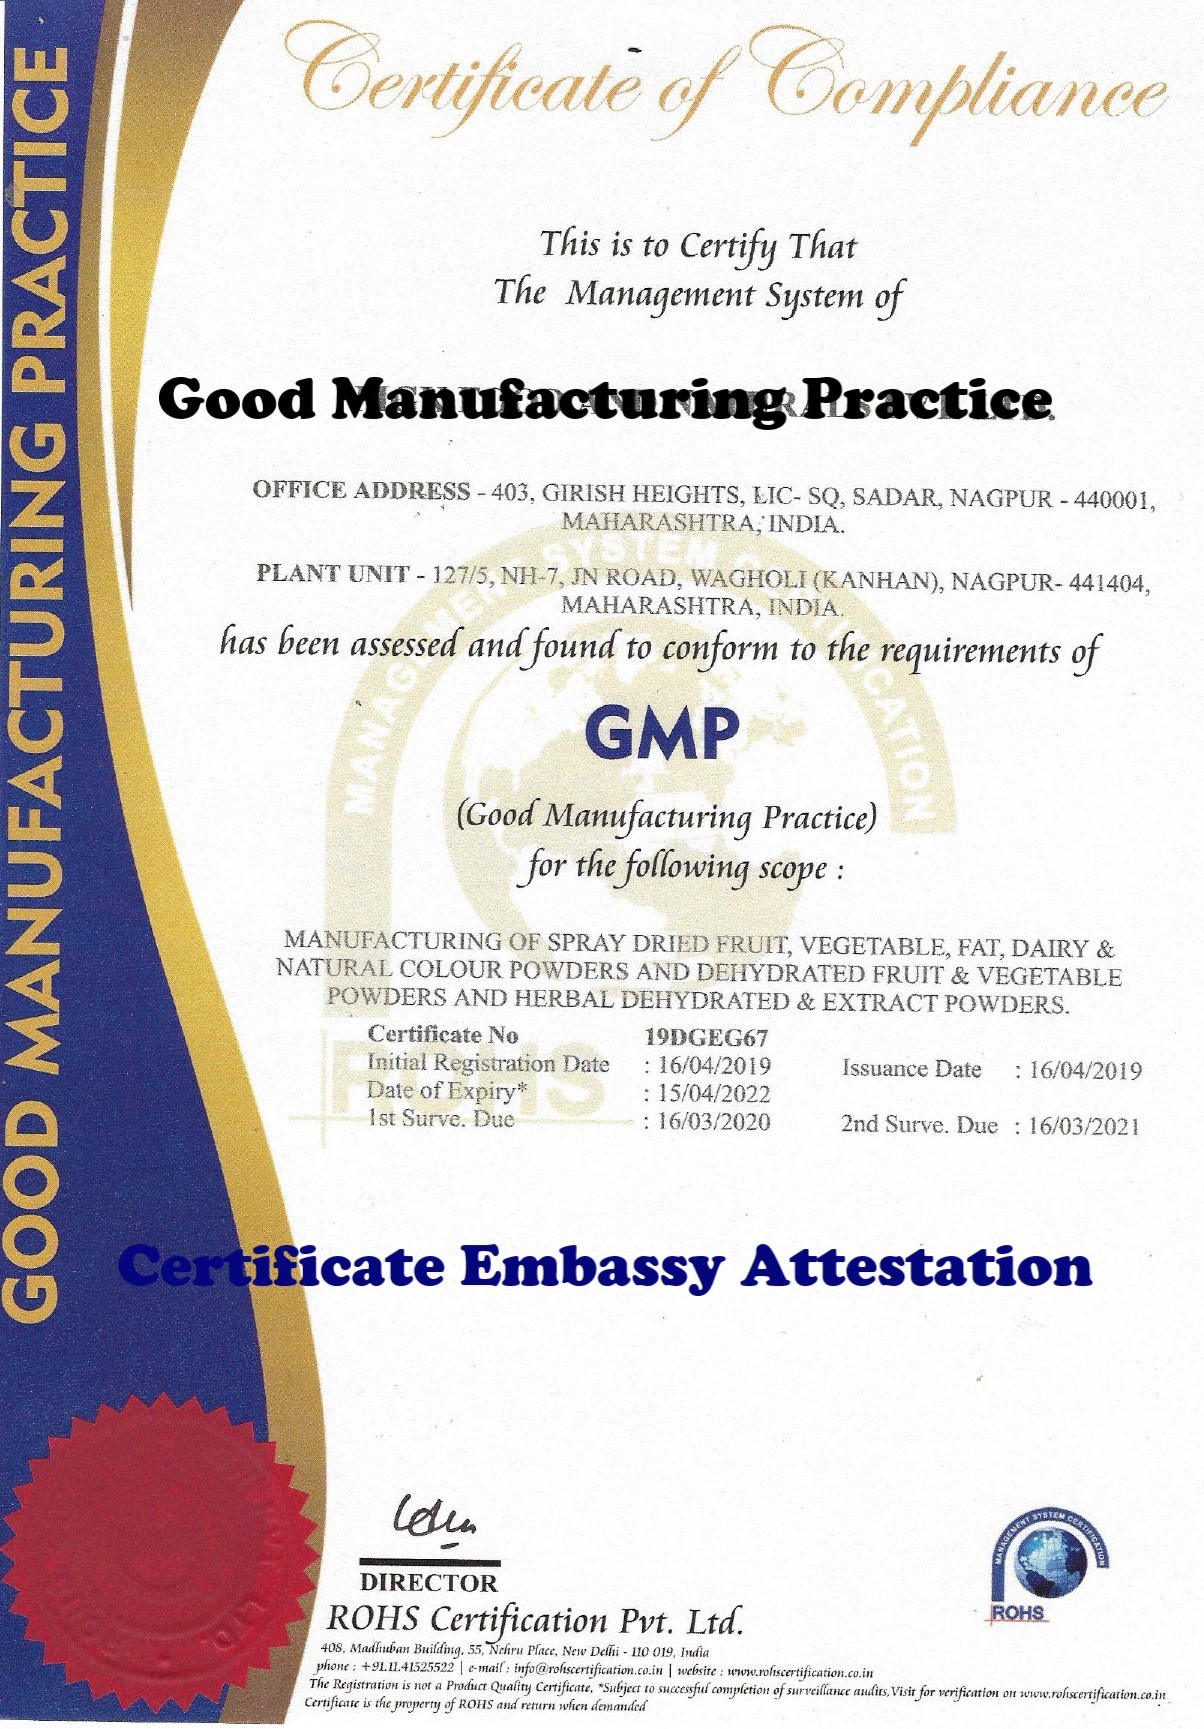 GMP Certificate Attestation from Singapore Embassy